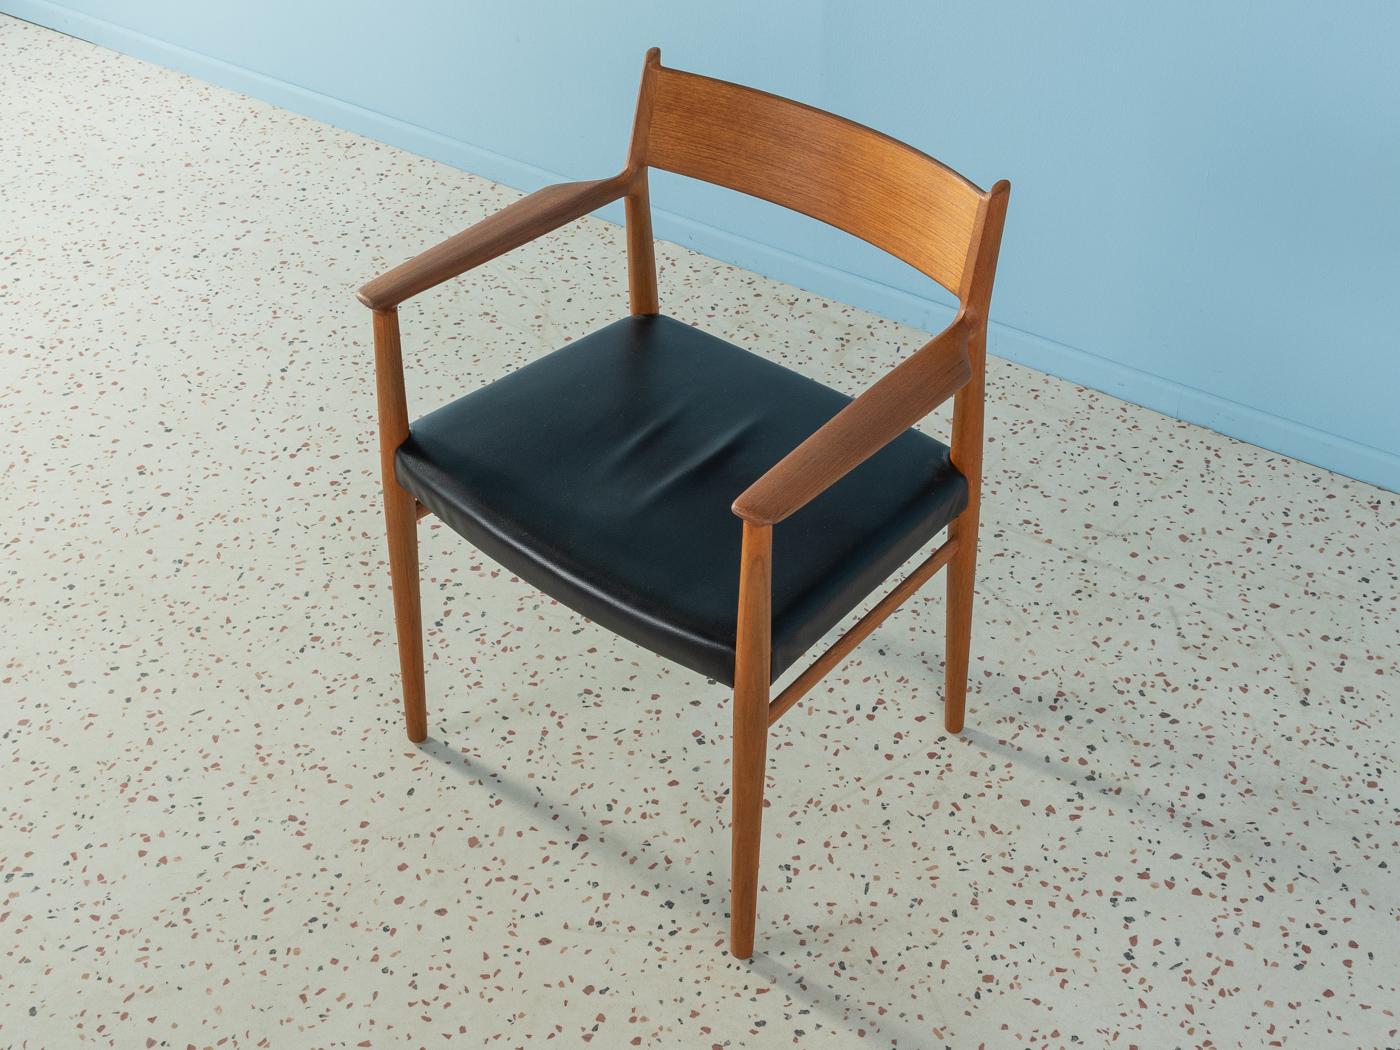 Armchair 418 A by Arne Vodder for Sibast from the 1960s. High-quality teak frame. The chair has been reupholstered and covered with the original leather cover.

Quality Features:
accomplished design: perfect proportions and visible attention to